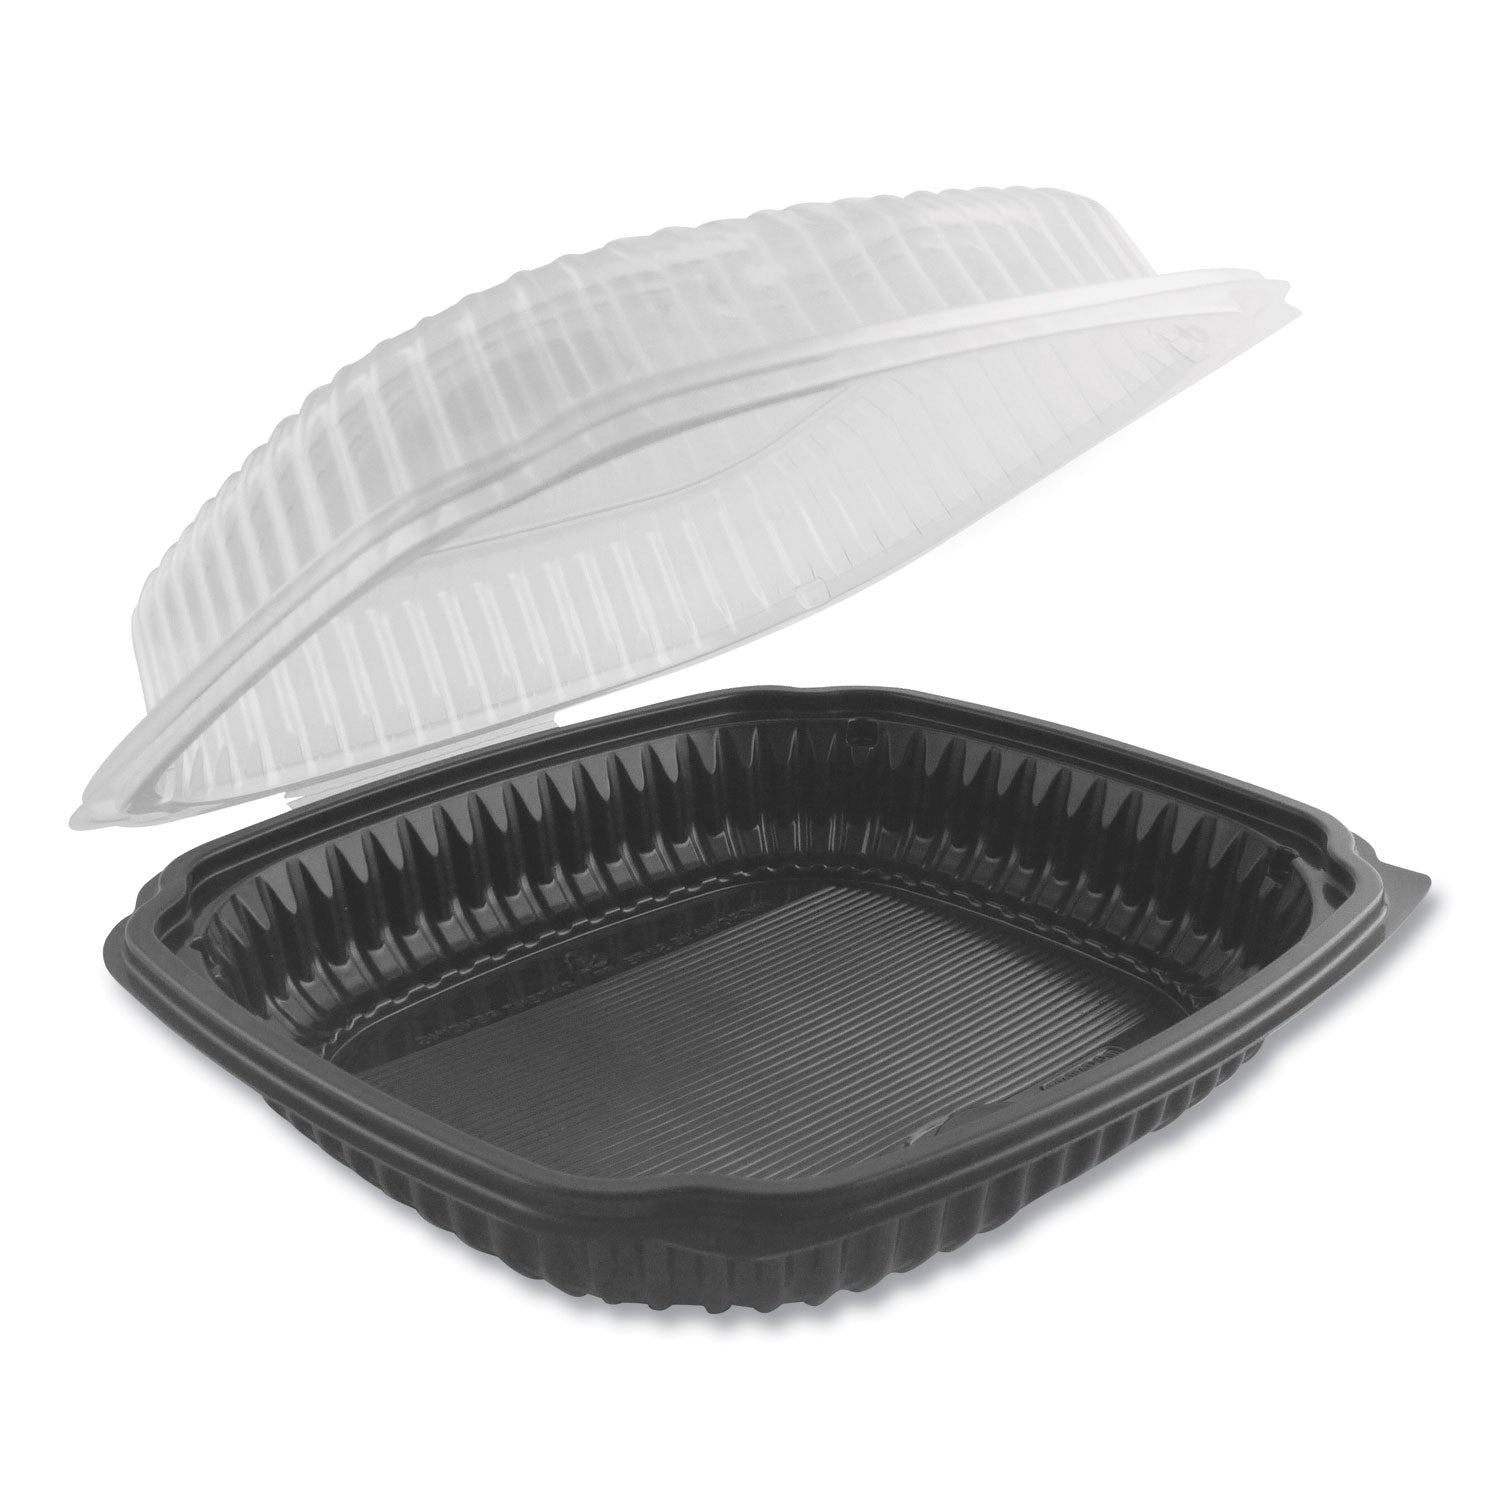 culinary-lites-microwavable-container-475-oz-1056-x-998-x-318-clear-black-plastic-100-carton_anz4699610 - 1